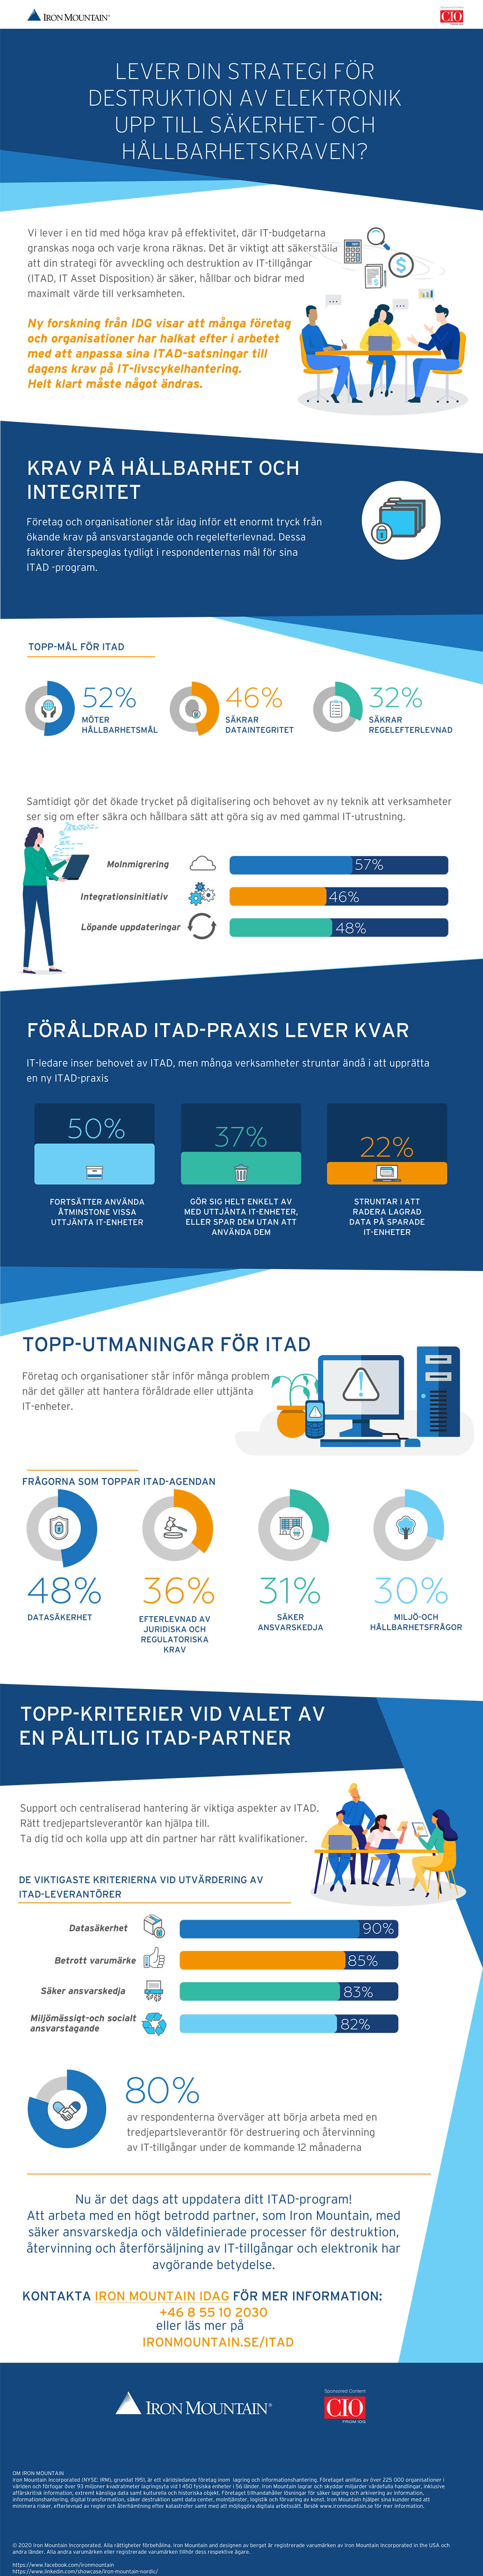 IDG research ITAD strategy